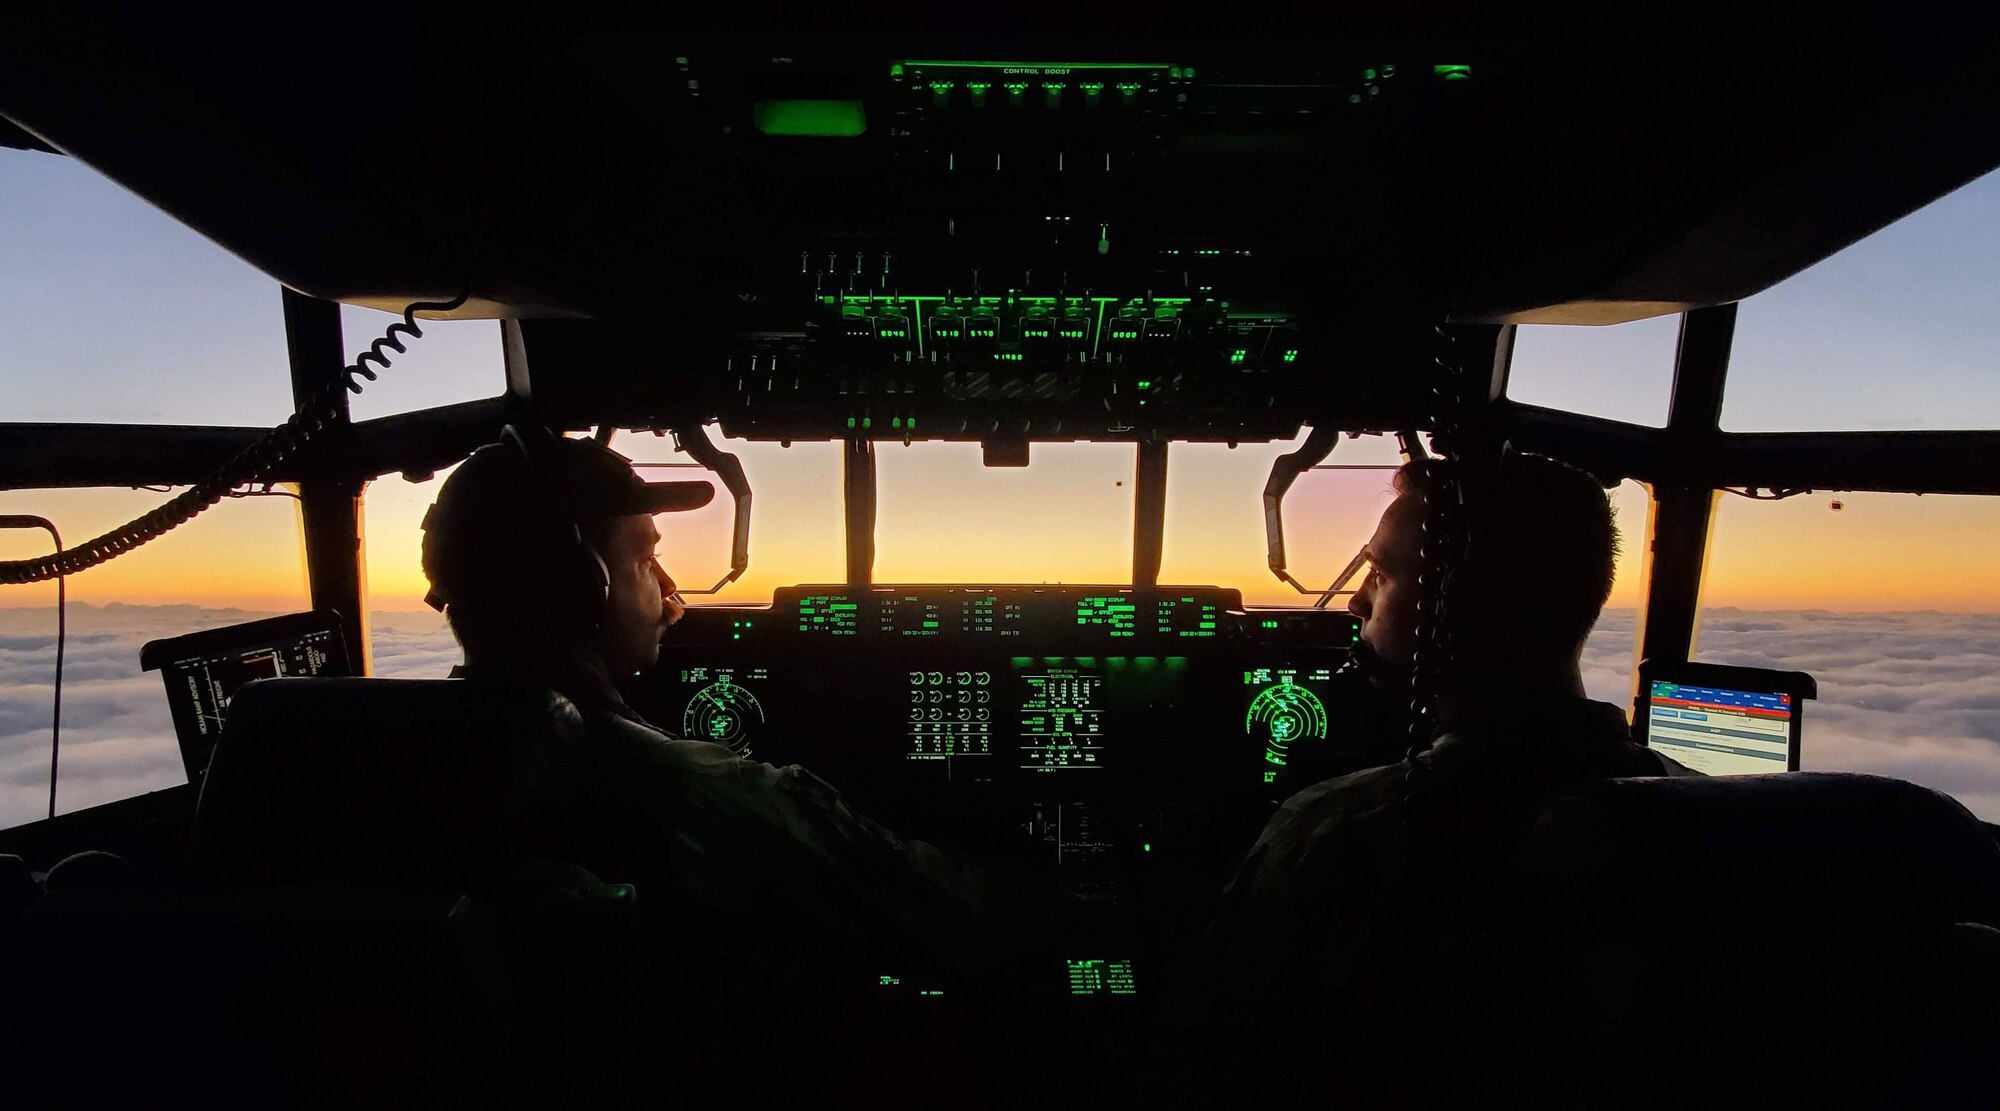 Two Airmen fly a plane above the clouds with a sunset in the background.